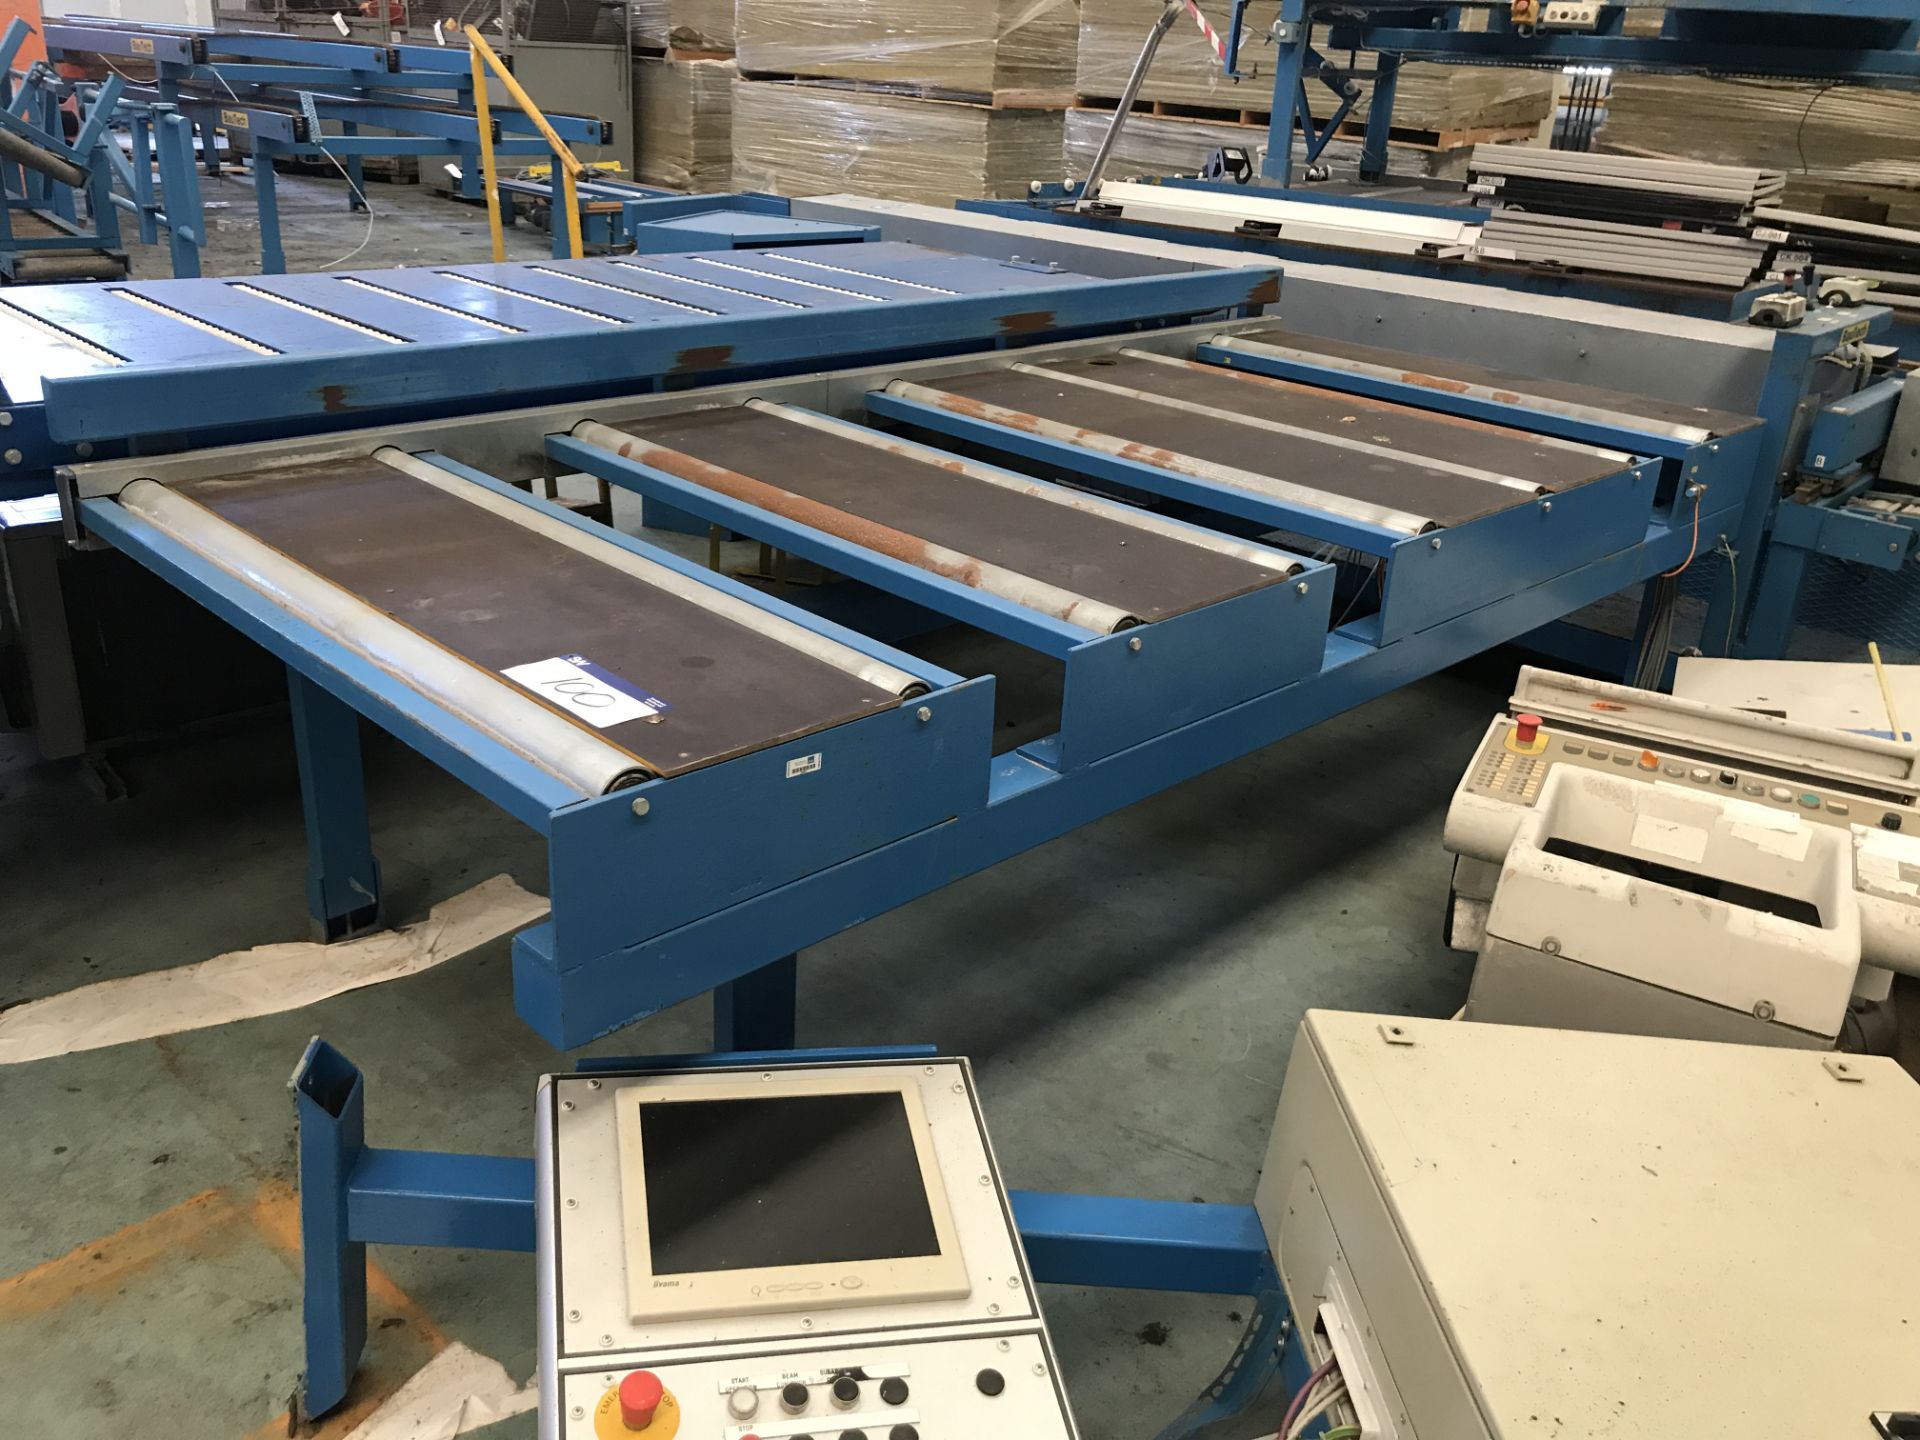 Powered Roller Conveyor Unit, approx. 1.33m wide on rollers x approx. 3.2m long overall